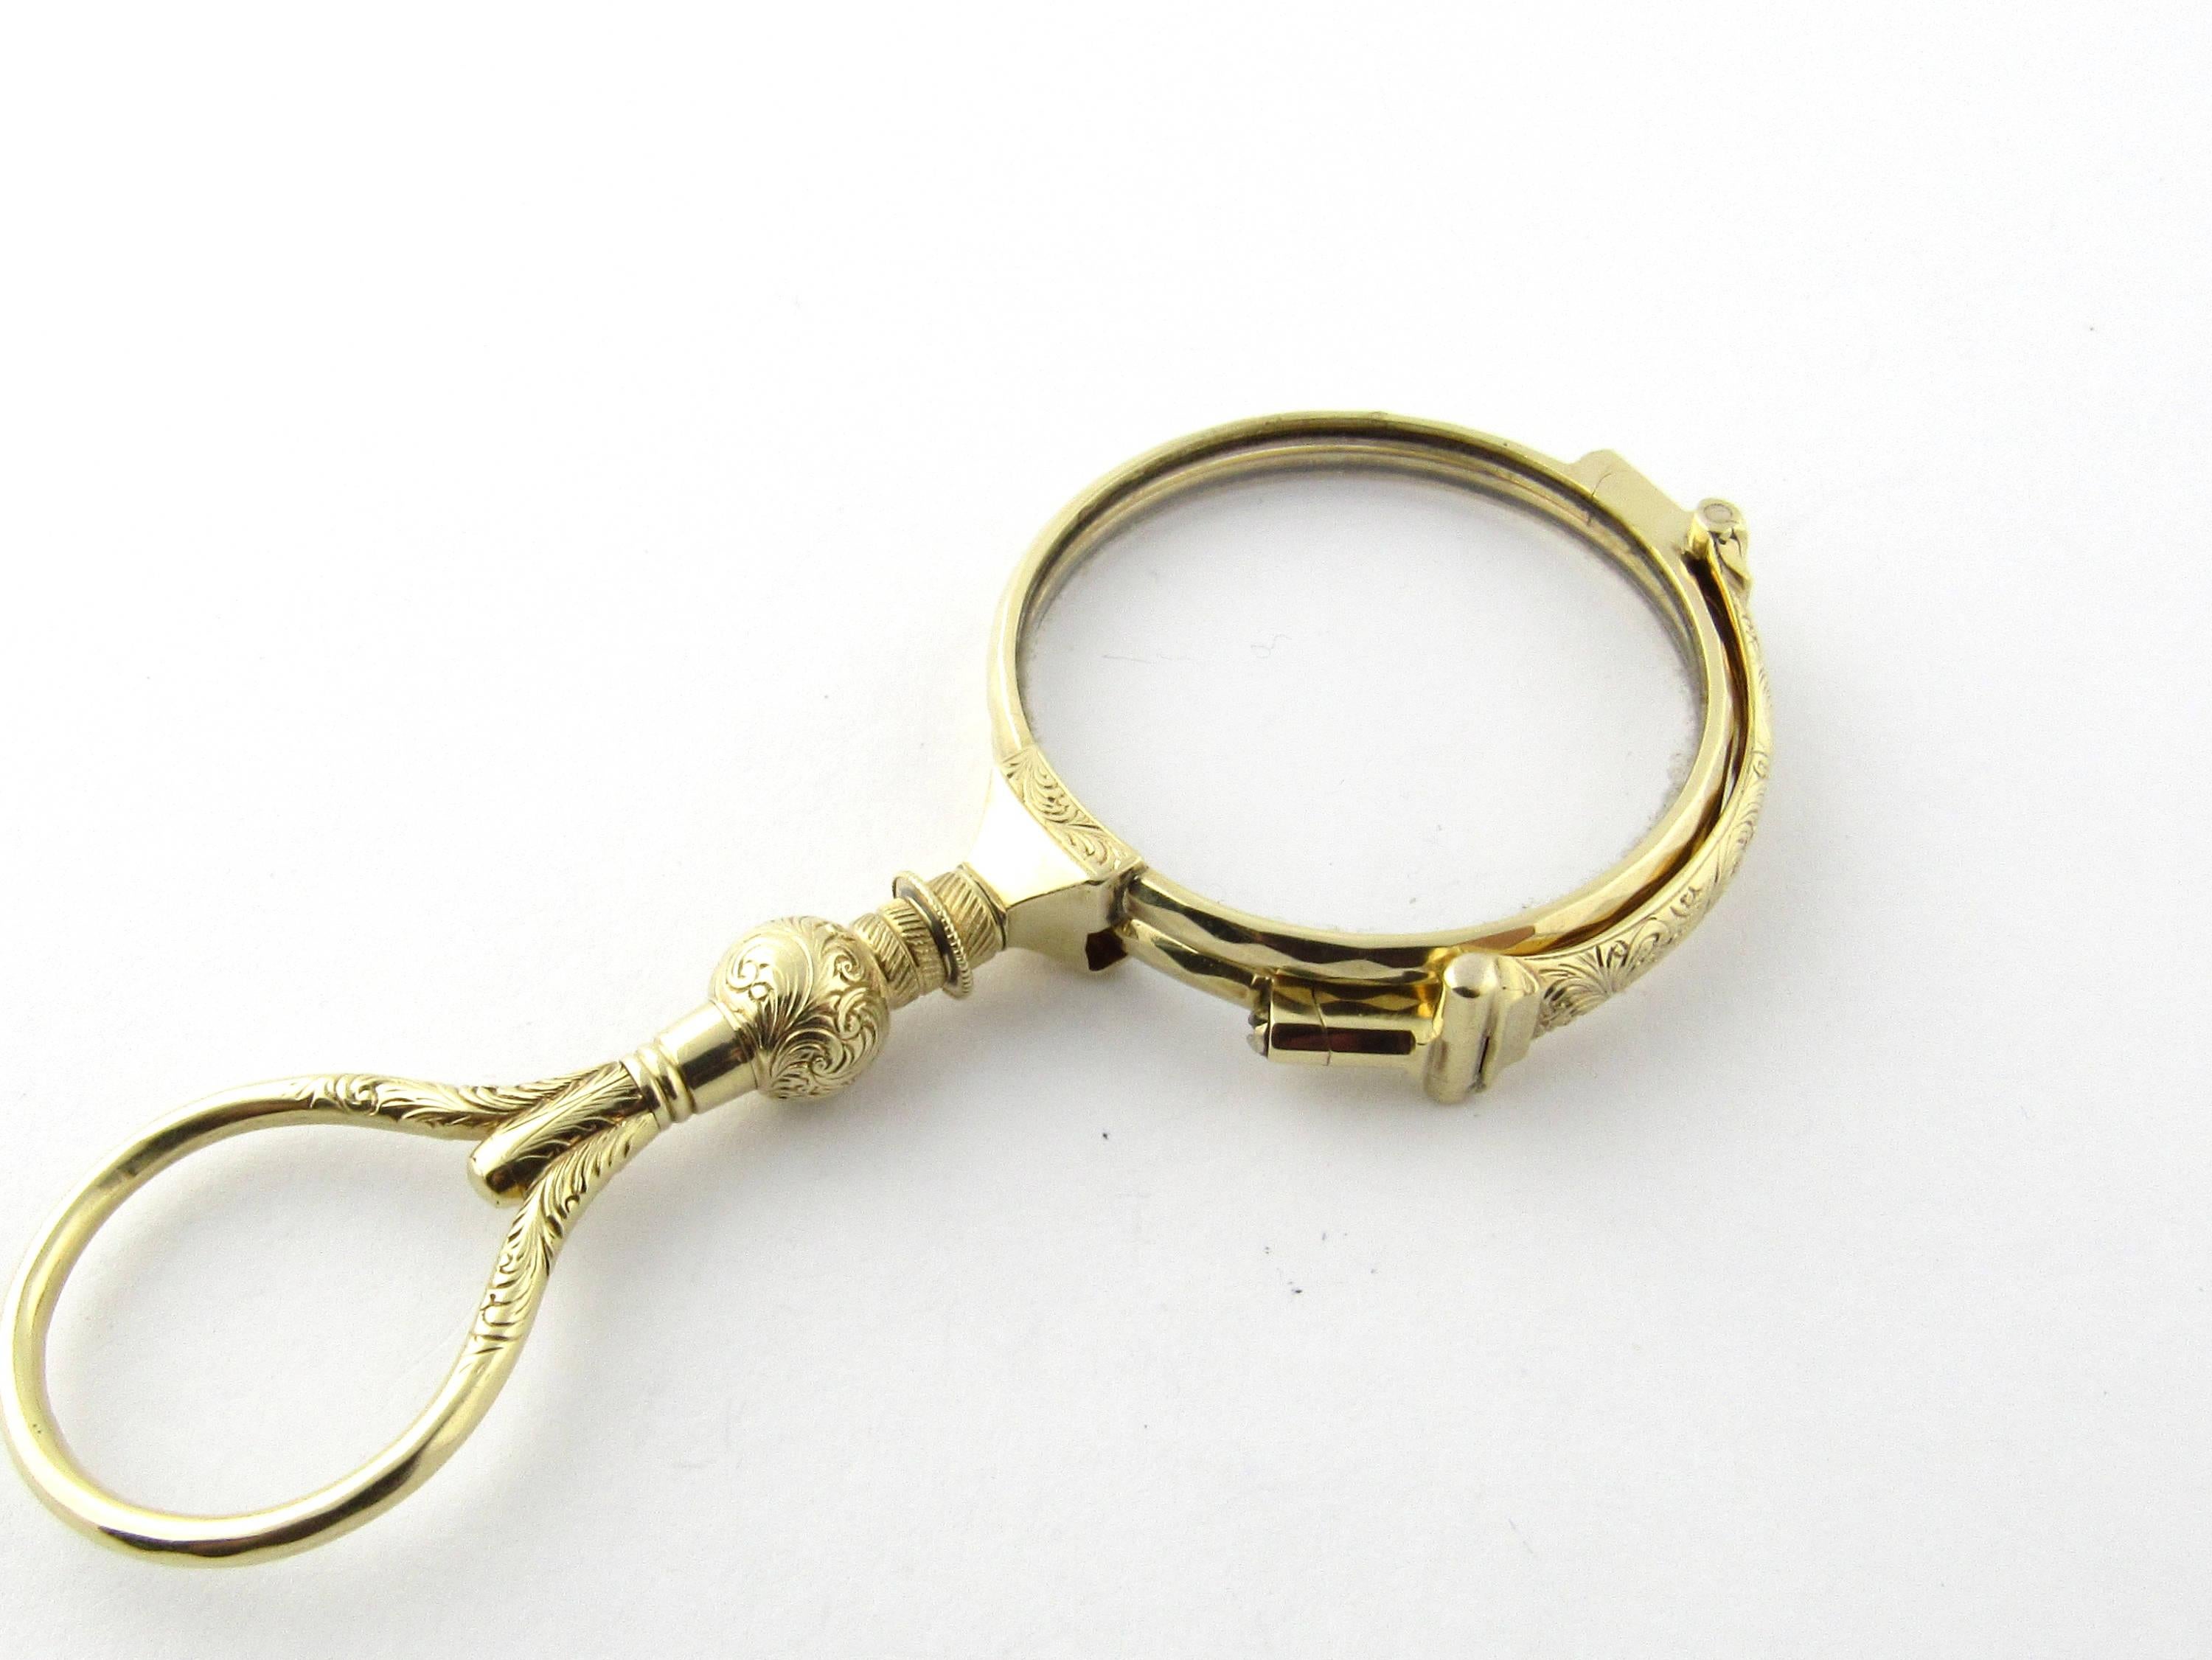 Vintage 14 Karat Yellow Gold Opera Glasses- 
This gorgeous lorgnette is a beautiful example of old-world style. Exquisitely detailed in ornate 14K yellow gold. Folding frames that open to full glasses. Each lens measures 33 mm. Bridge measures 28